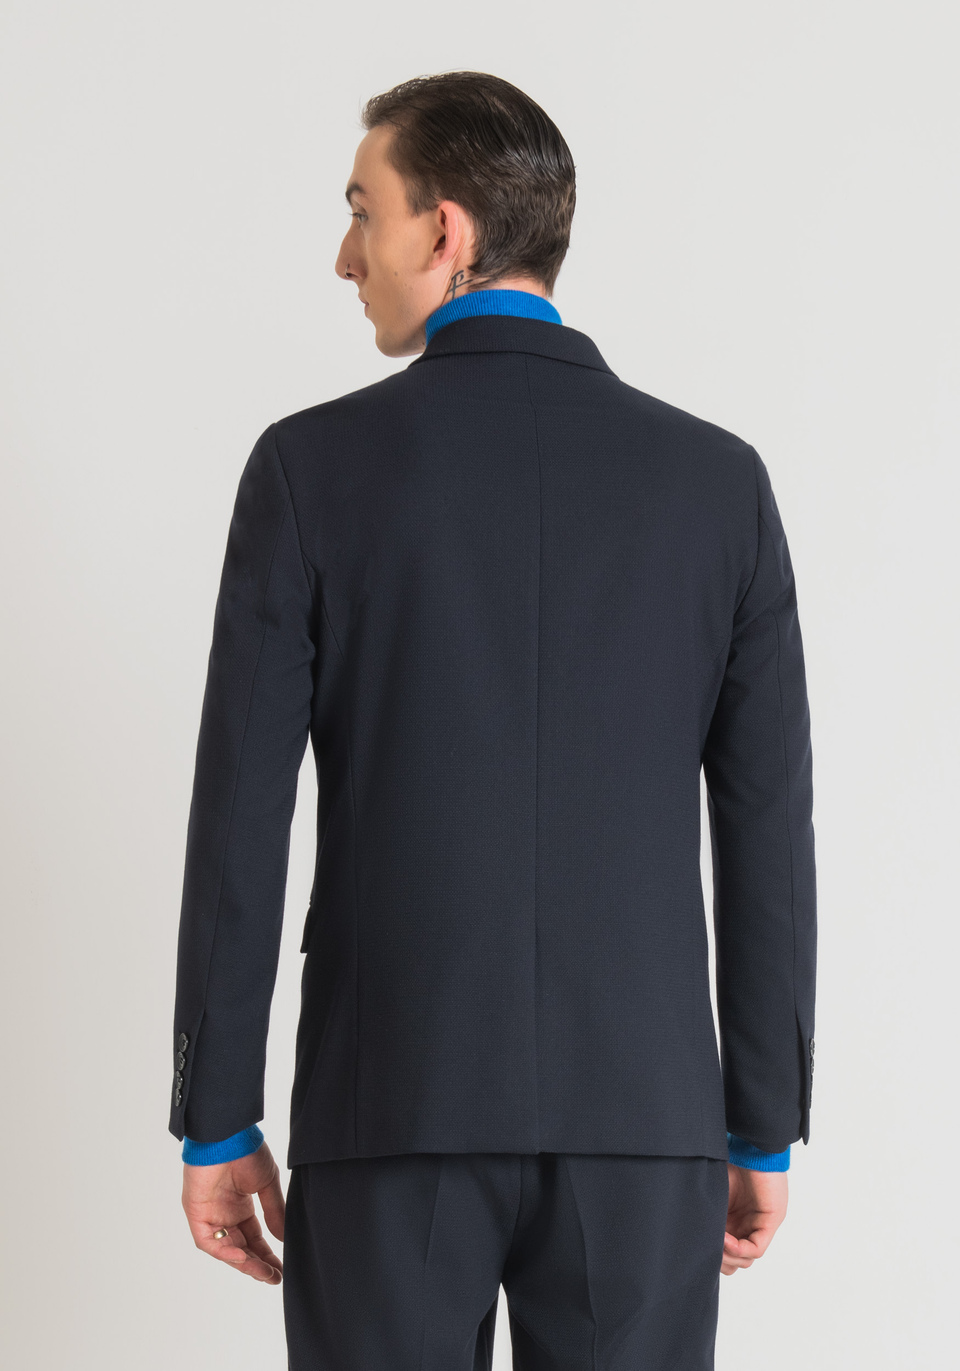 "ROGER" REGULAR-FIT DOUBLE-BREASTED JACKET IN STRETCH VISCOSE BLEND DOBBY FABRIC - Antony Morato Online Shop